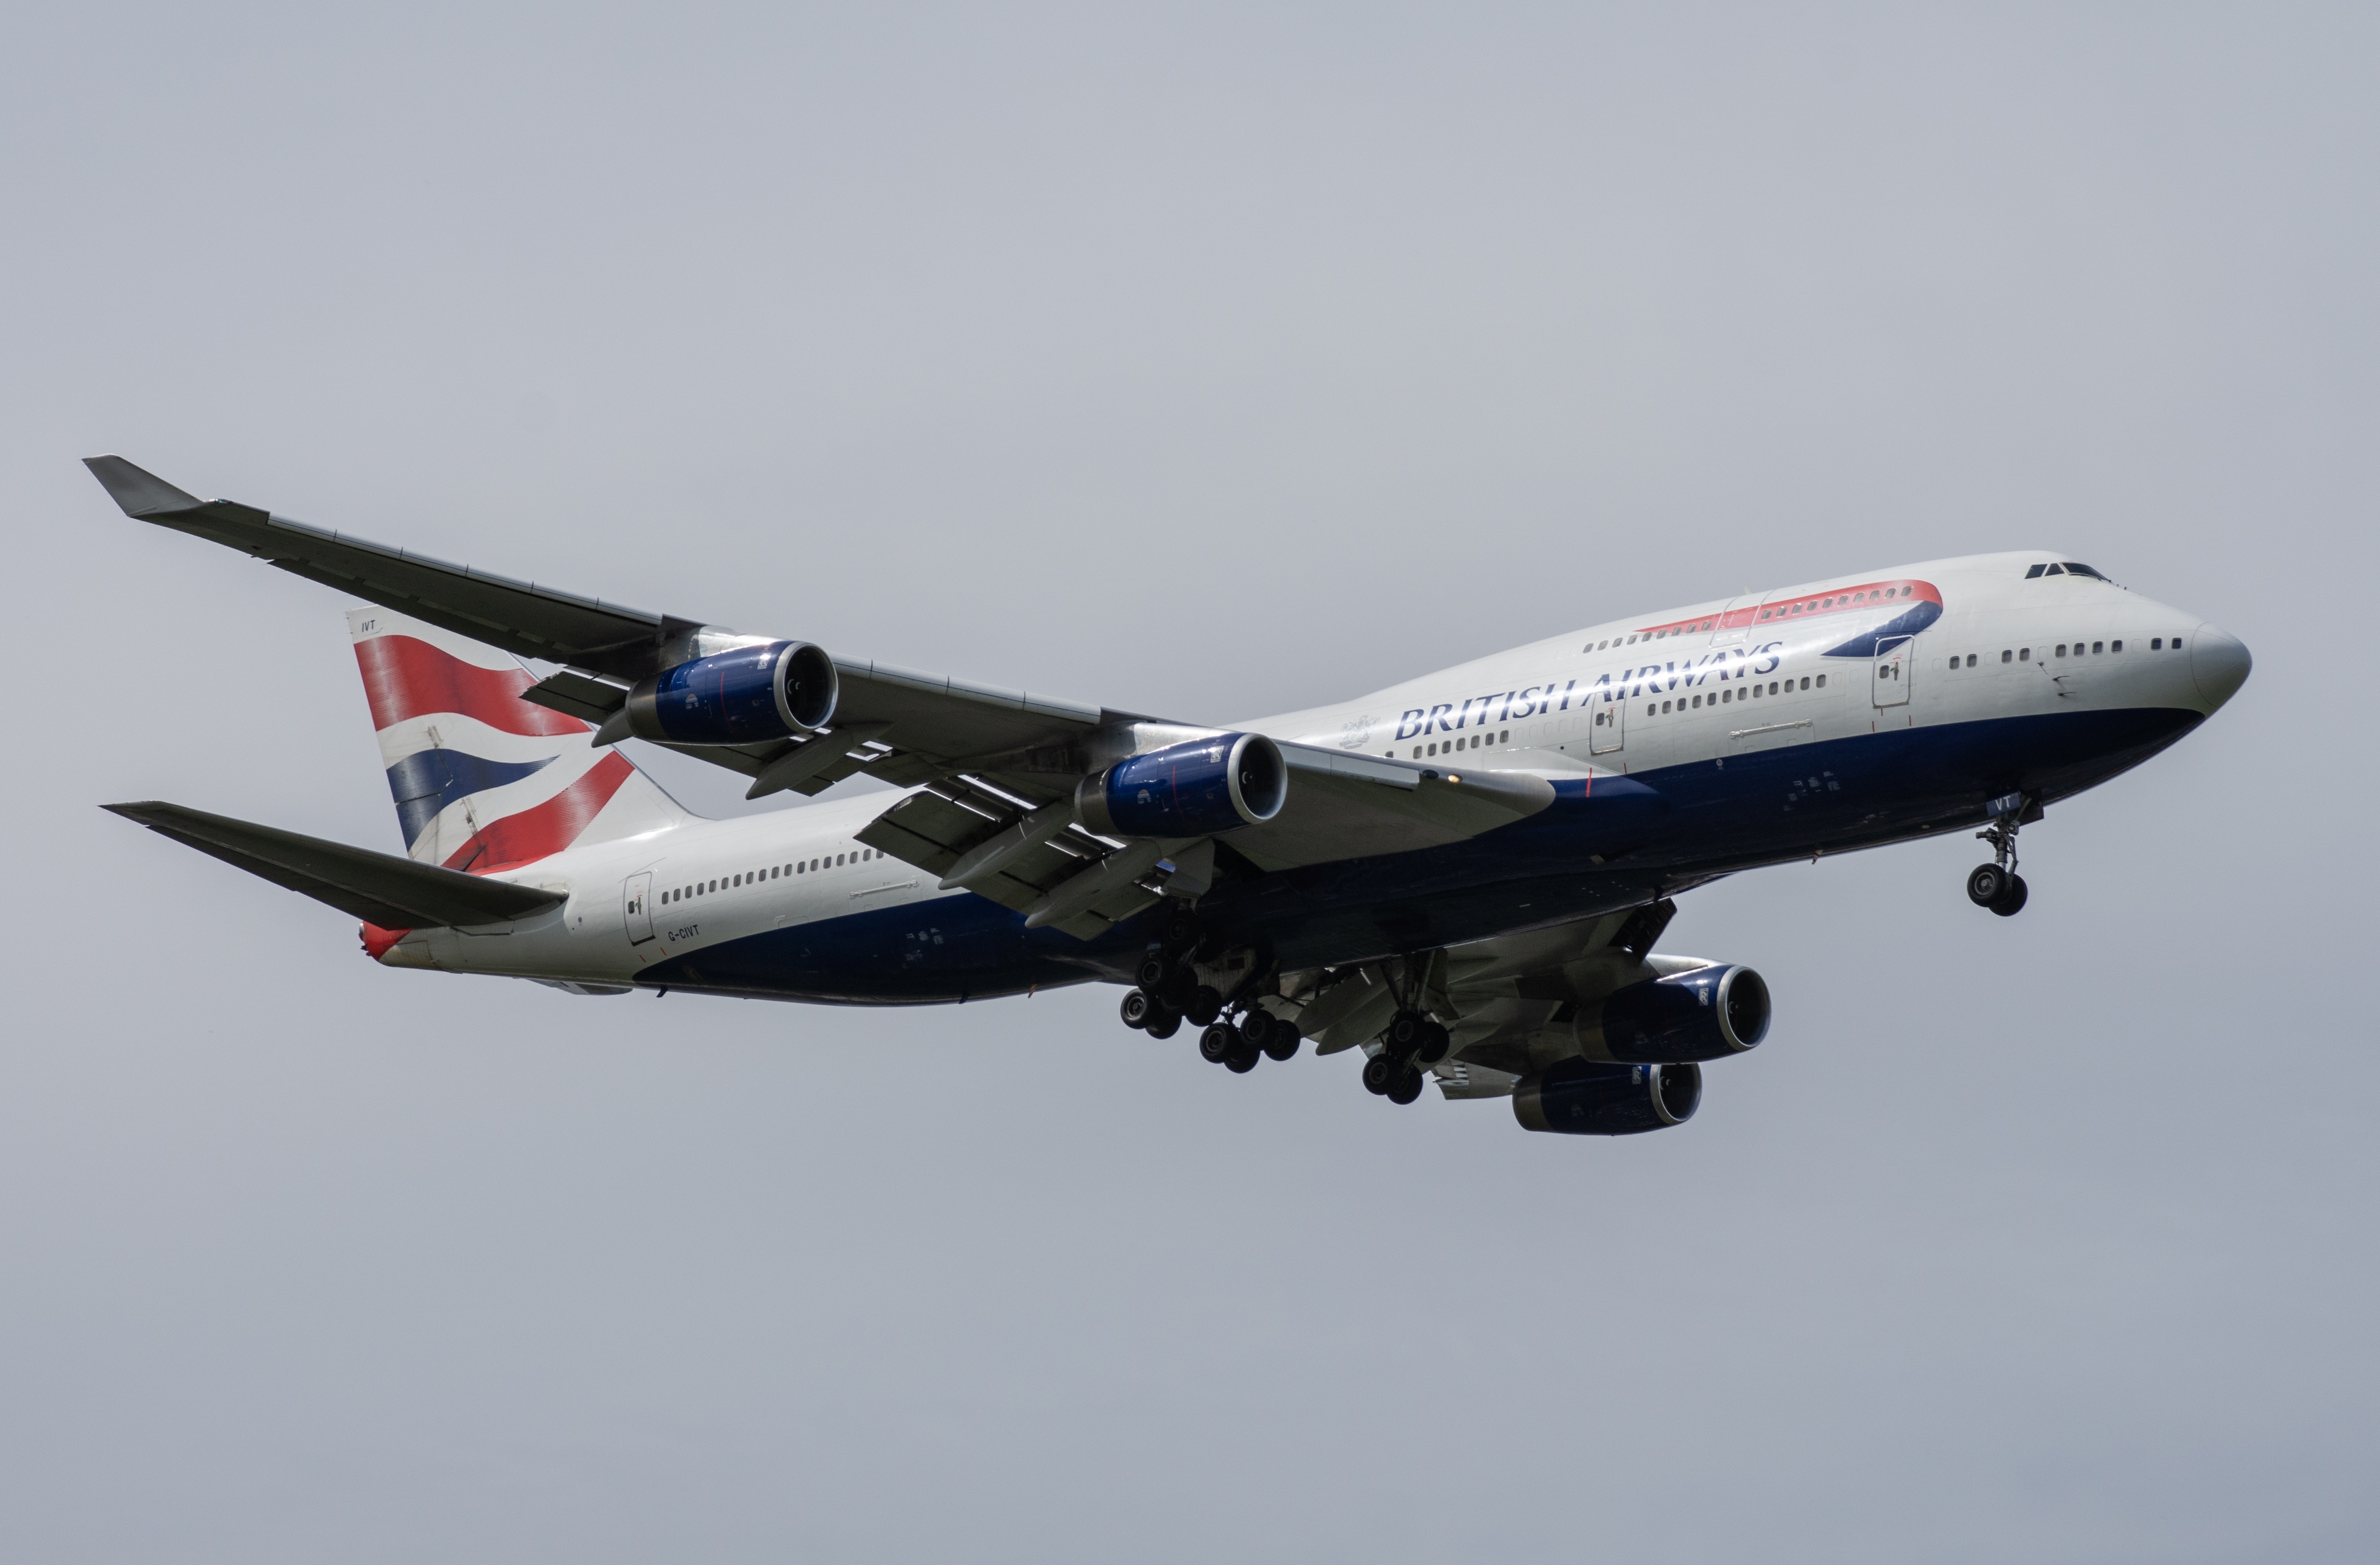 G-CIVT/GCIVT Withdrawn from use Boeing 747 Airframe Information - AVSpotters.com